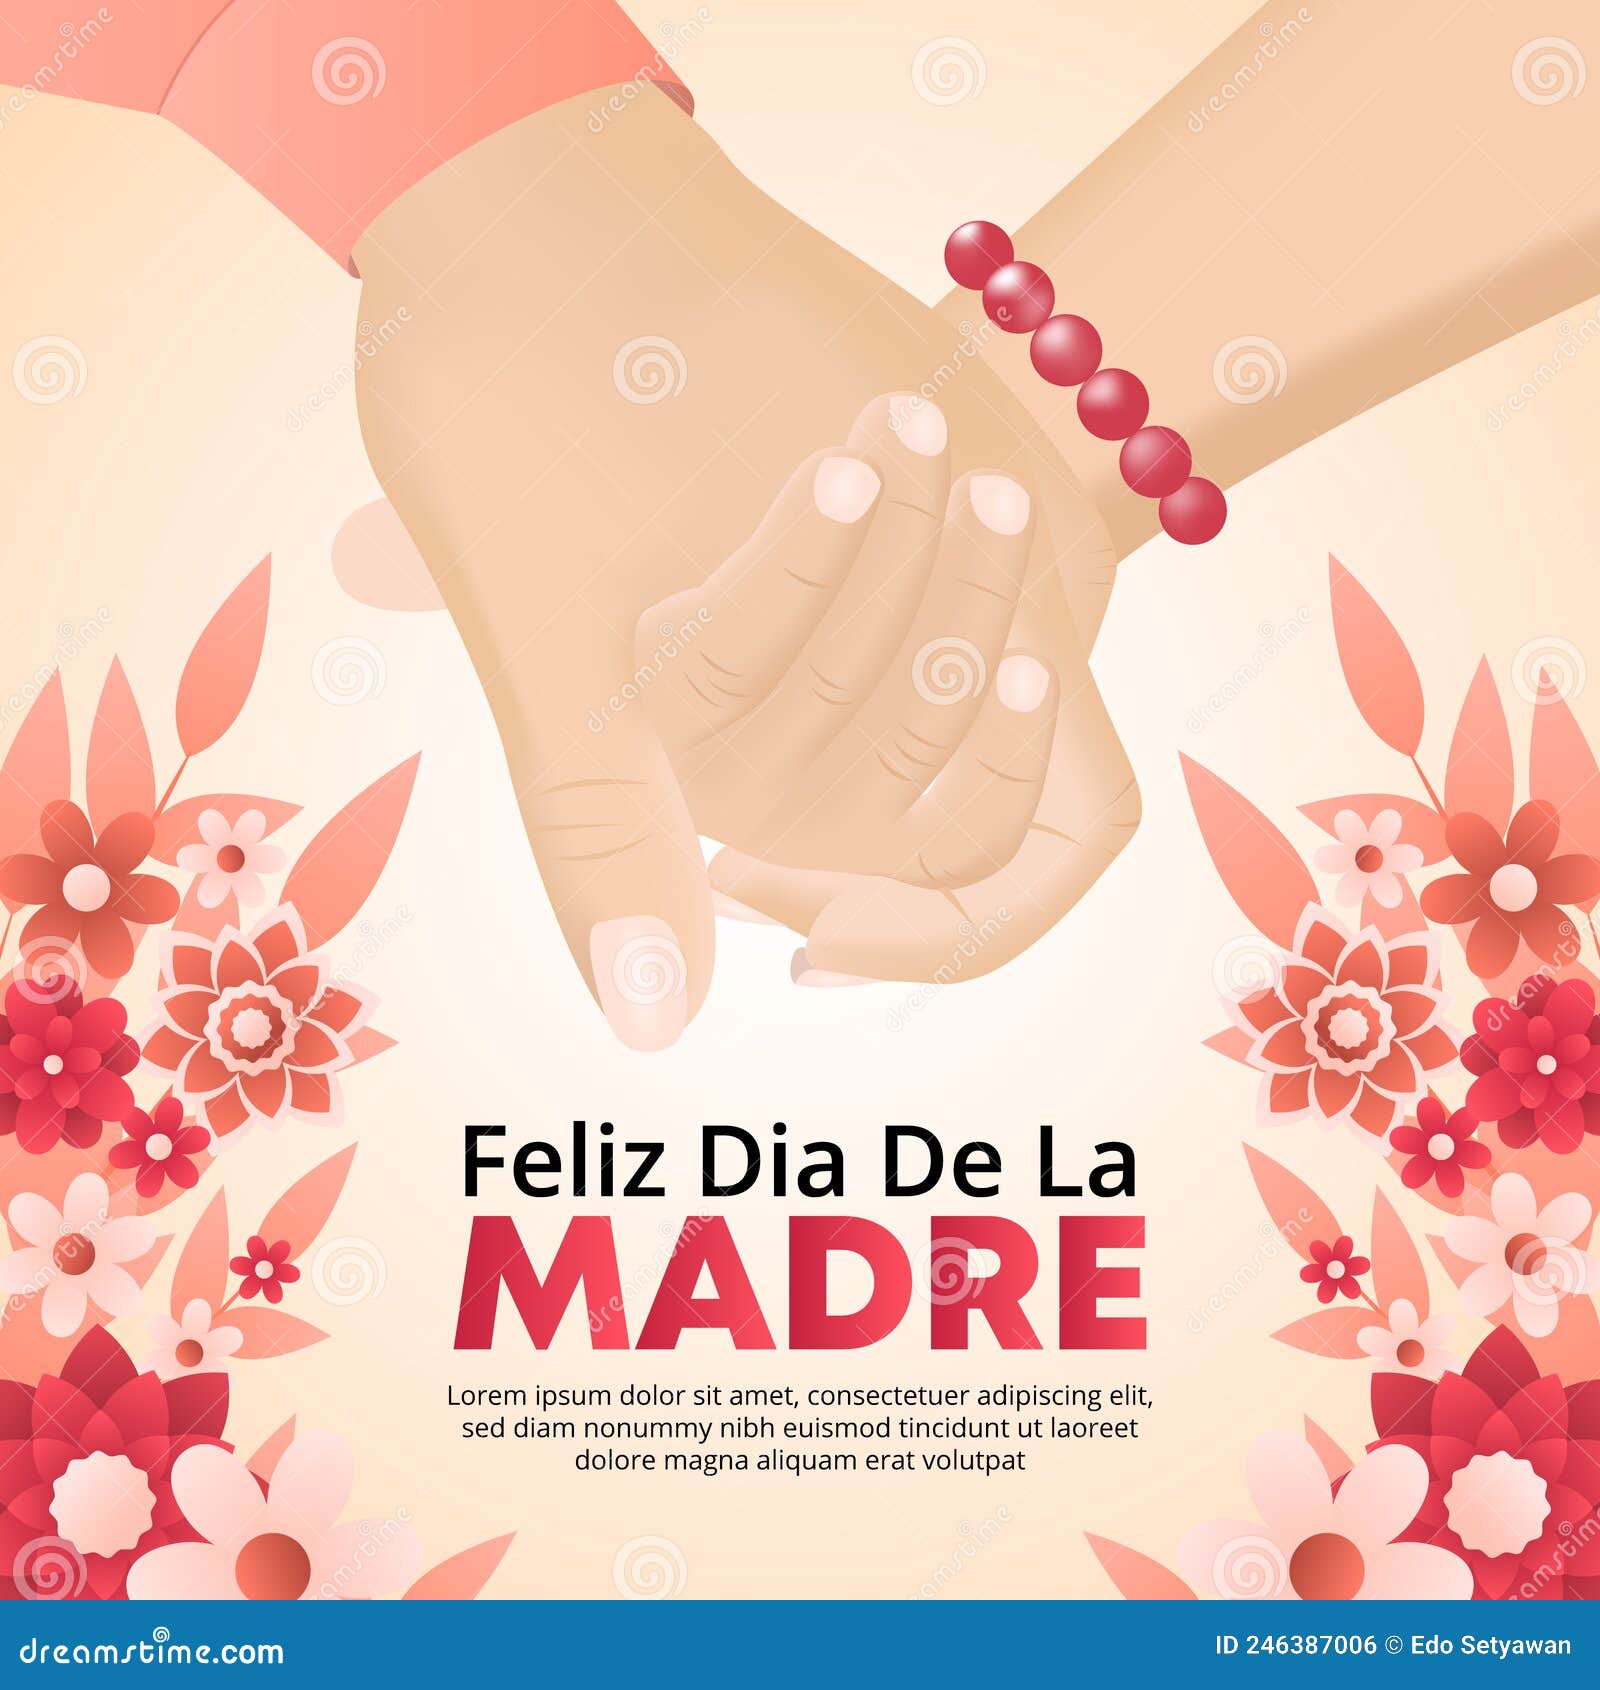 feliz dia de la madre or happy mothers day background with hands of mother and daughter holding together